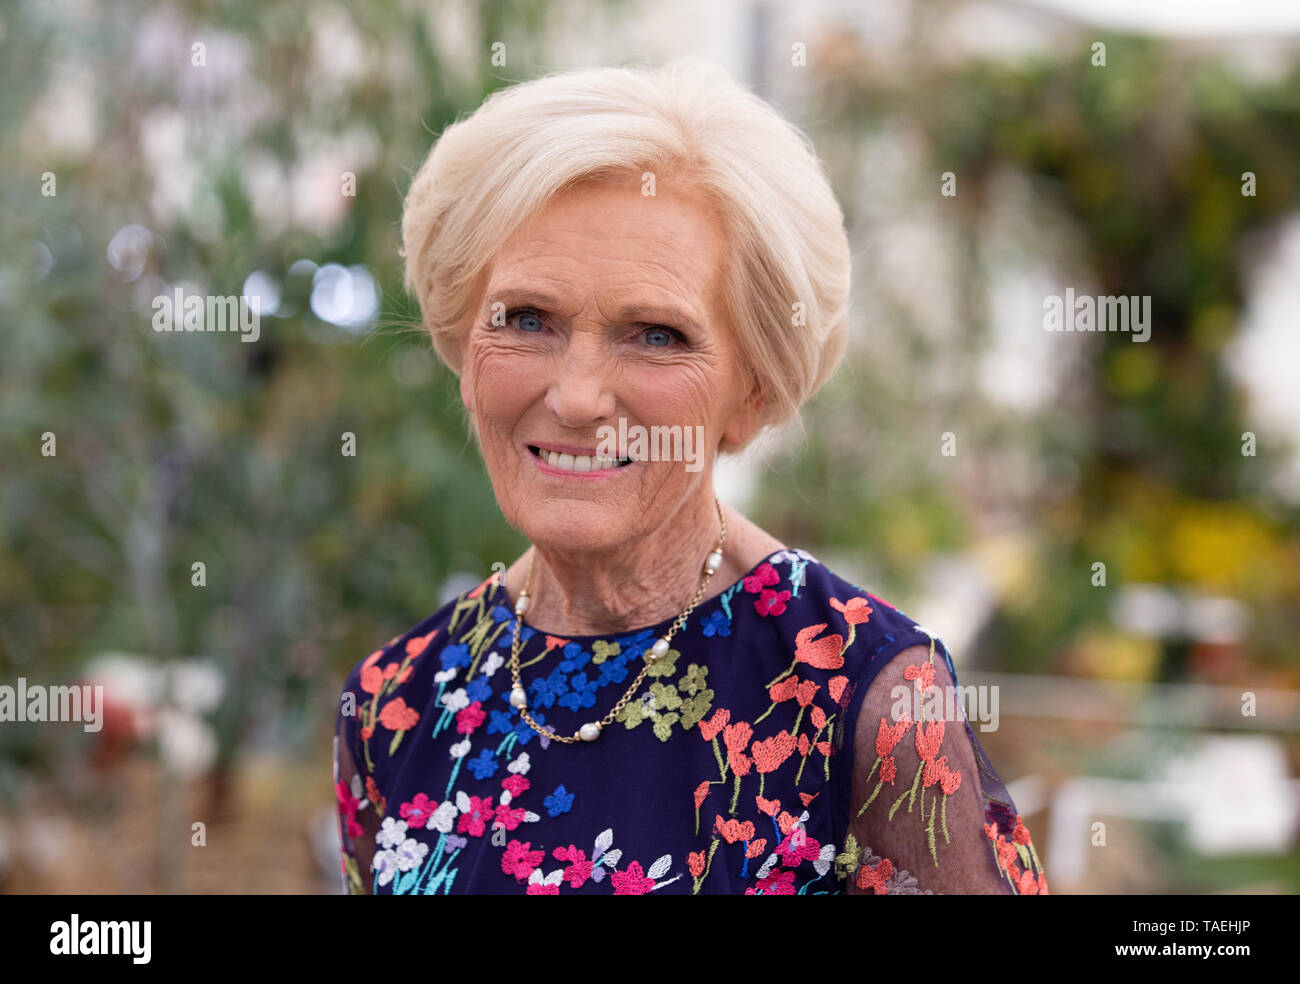 Mary Berry, British food writer and television presenter, at the RHS Chelsea Flower Show. She presented 'The Great British Bake-Off' on the BBC. Stock Photo